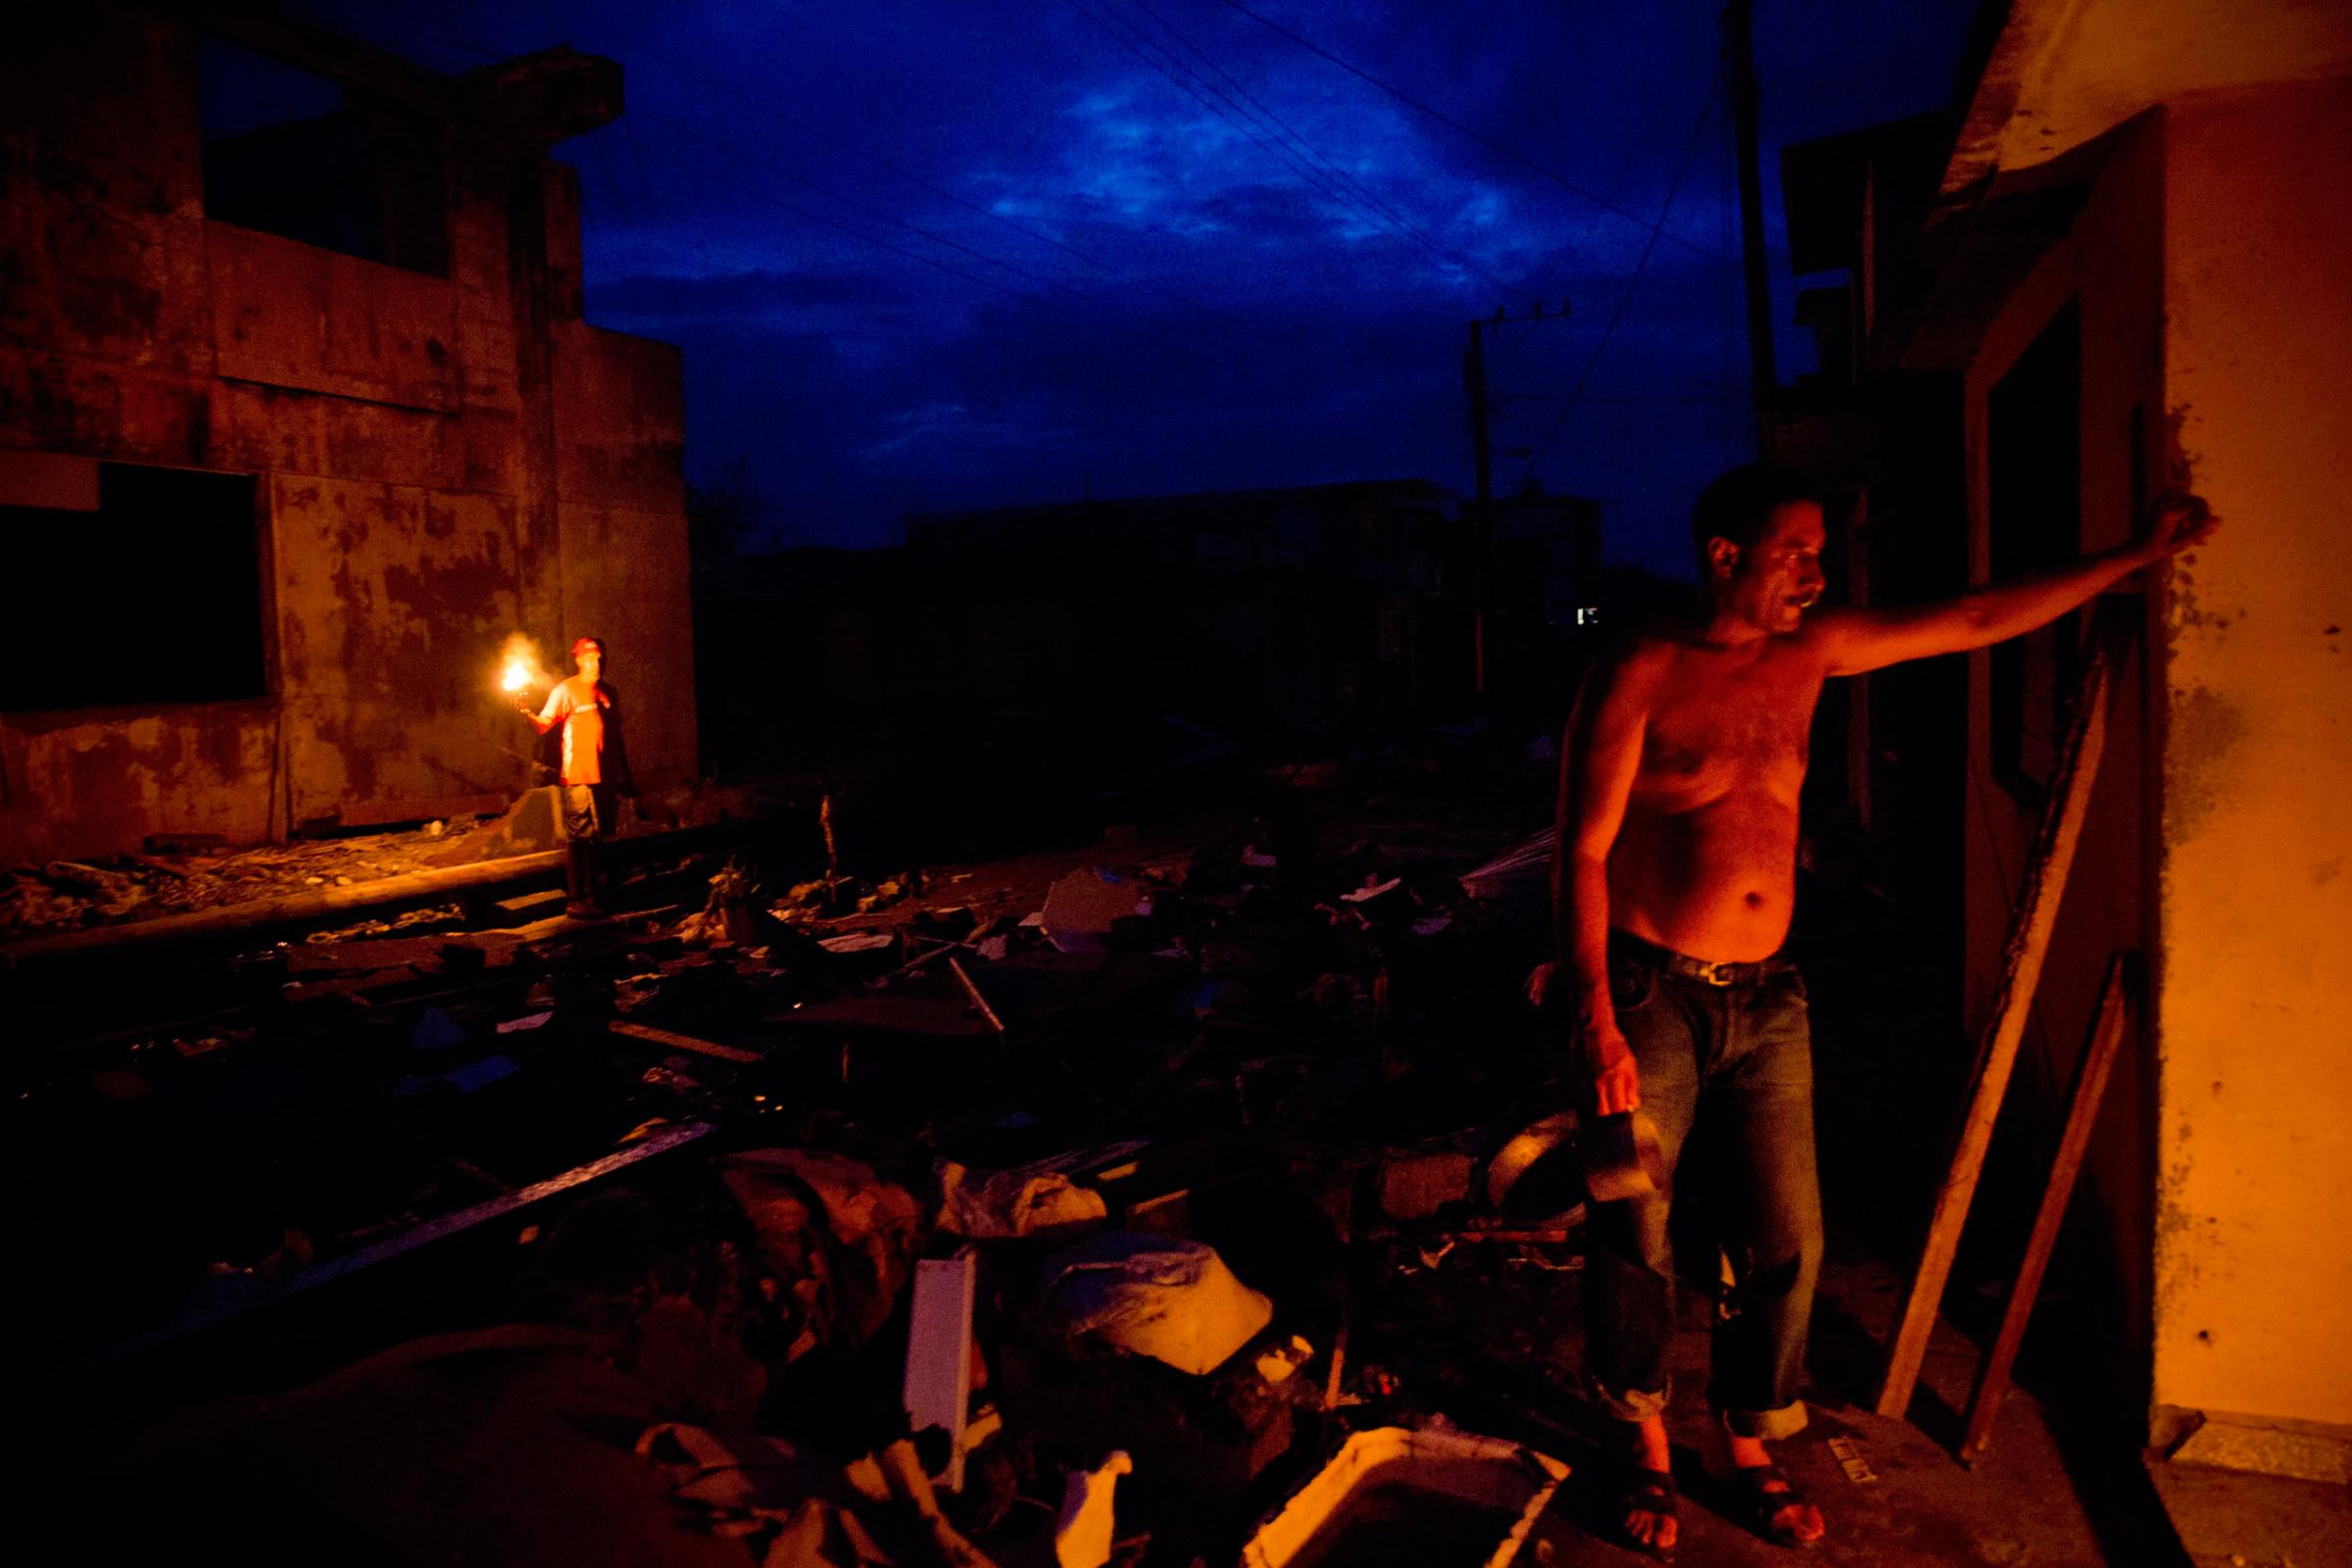 Jorge Luis Azahares, 52, waits for his wife to arrive with food, amid the ruins of his home destroyed by Hurricane Matthew, in Baracoa, Cuba, Thursday, Oct. 6, 2016. Matthew hit Cuba's lightly populated eastern tip Tuesday night, damaging hundreds of homes in the easternmost city of Baracoa but there were no reports of deaths. Nearly 380,000 people were evacuated and measures were taken to protect infrastructure. (AP Photo/Ramon Espinosa)